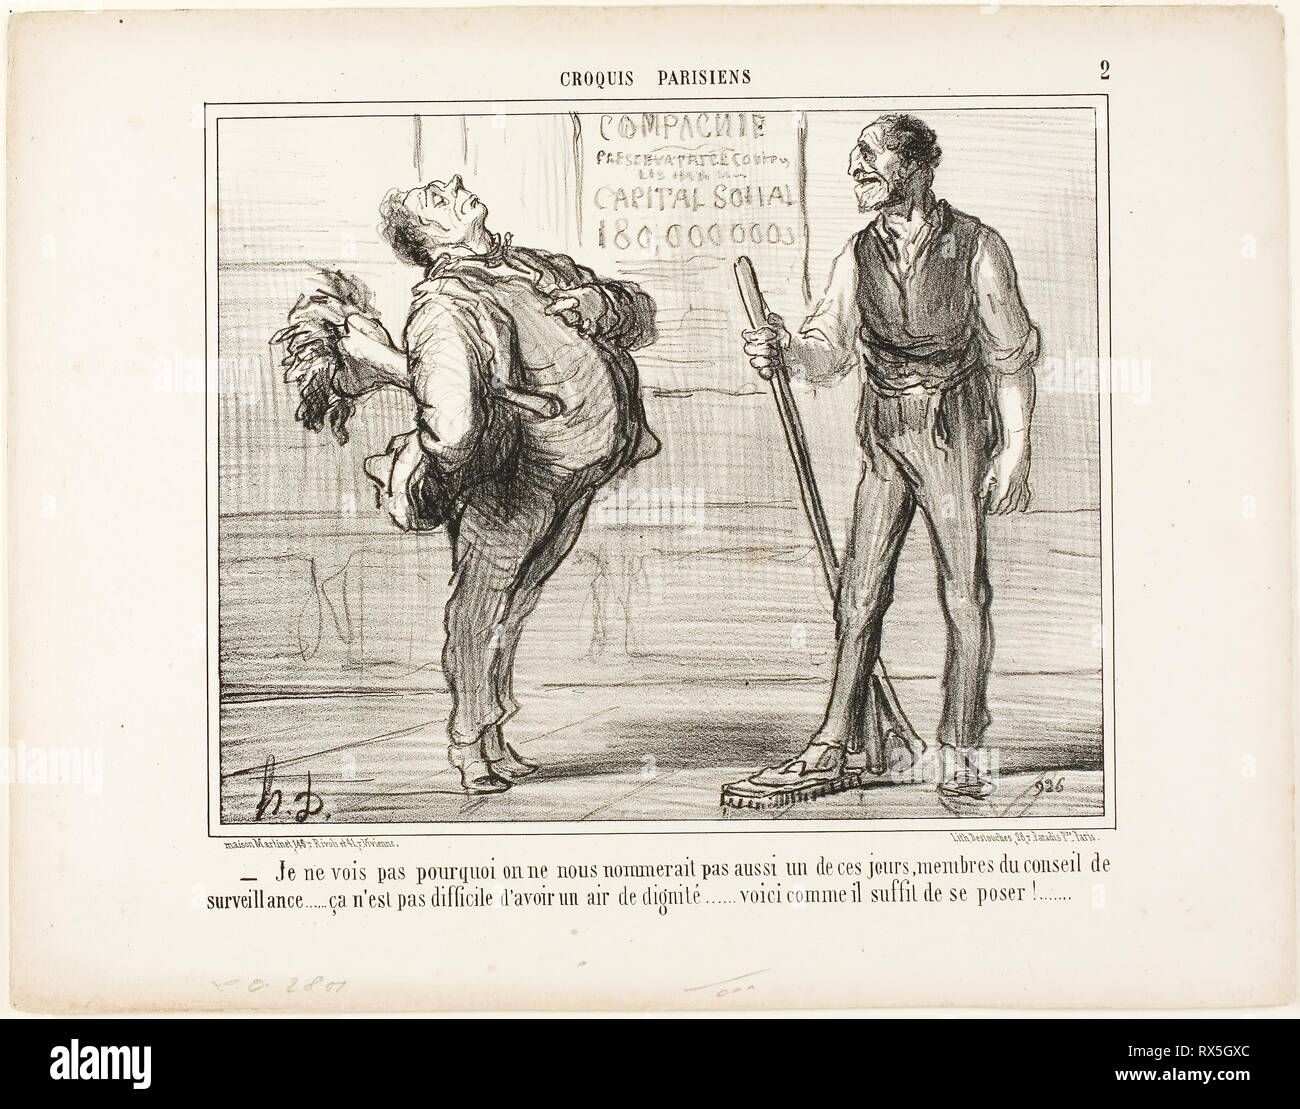 '- I really don't see why we shouldn't be nominated members of the surveillance council one of these days..... after all it isn't that difficult to look dignified... how about a pose like this?,' plate 2 from Croquis Parisiens. Honoré Victorin Daumier; French, 1808-1879. Date: 1856. Dimensions: 205 × 253 mm (image); 279.5 × 358.5 mm (sheet). Lithograph in black on buff wove paper. Origin: France. Museum: The Chicago Art Institute. Author: Honoré-Victorin Daumier. Stock Photo